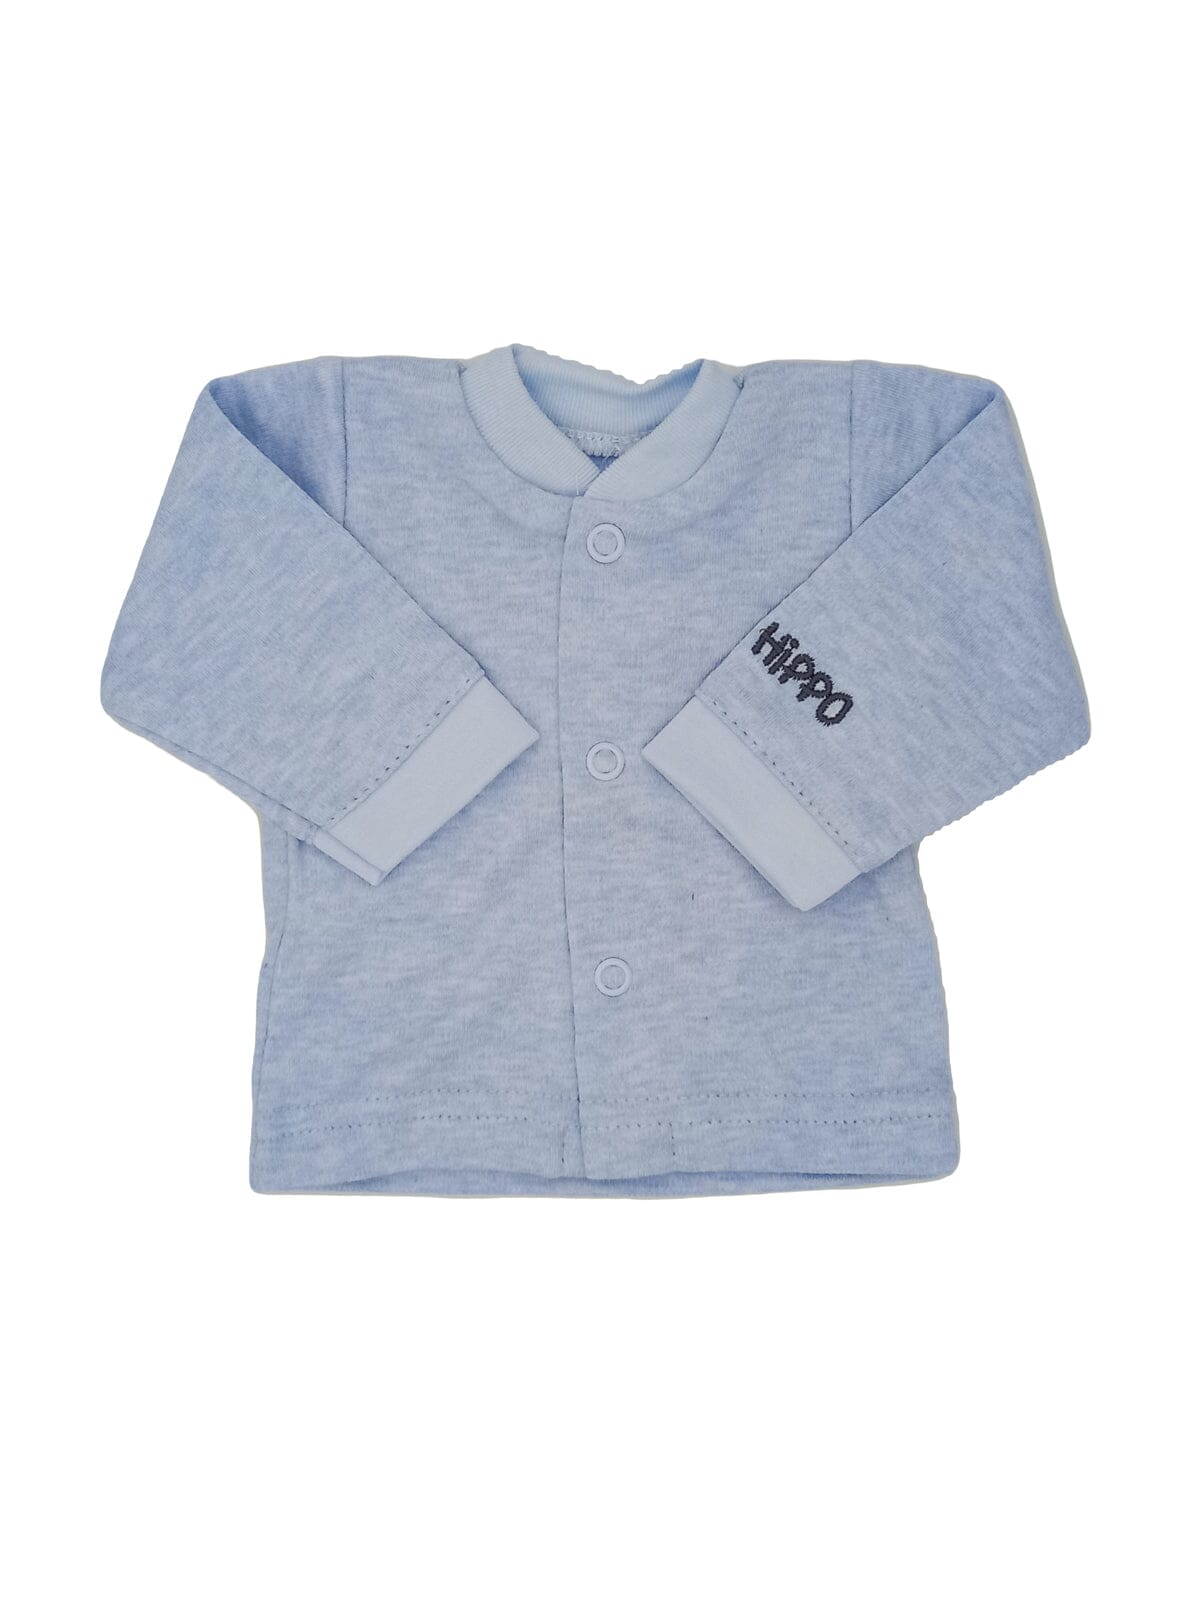 Early Baby Long Sleeved Top, Blue Hippo - Top / T-shirt - EEVI